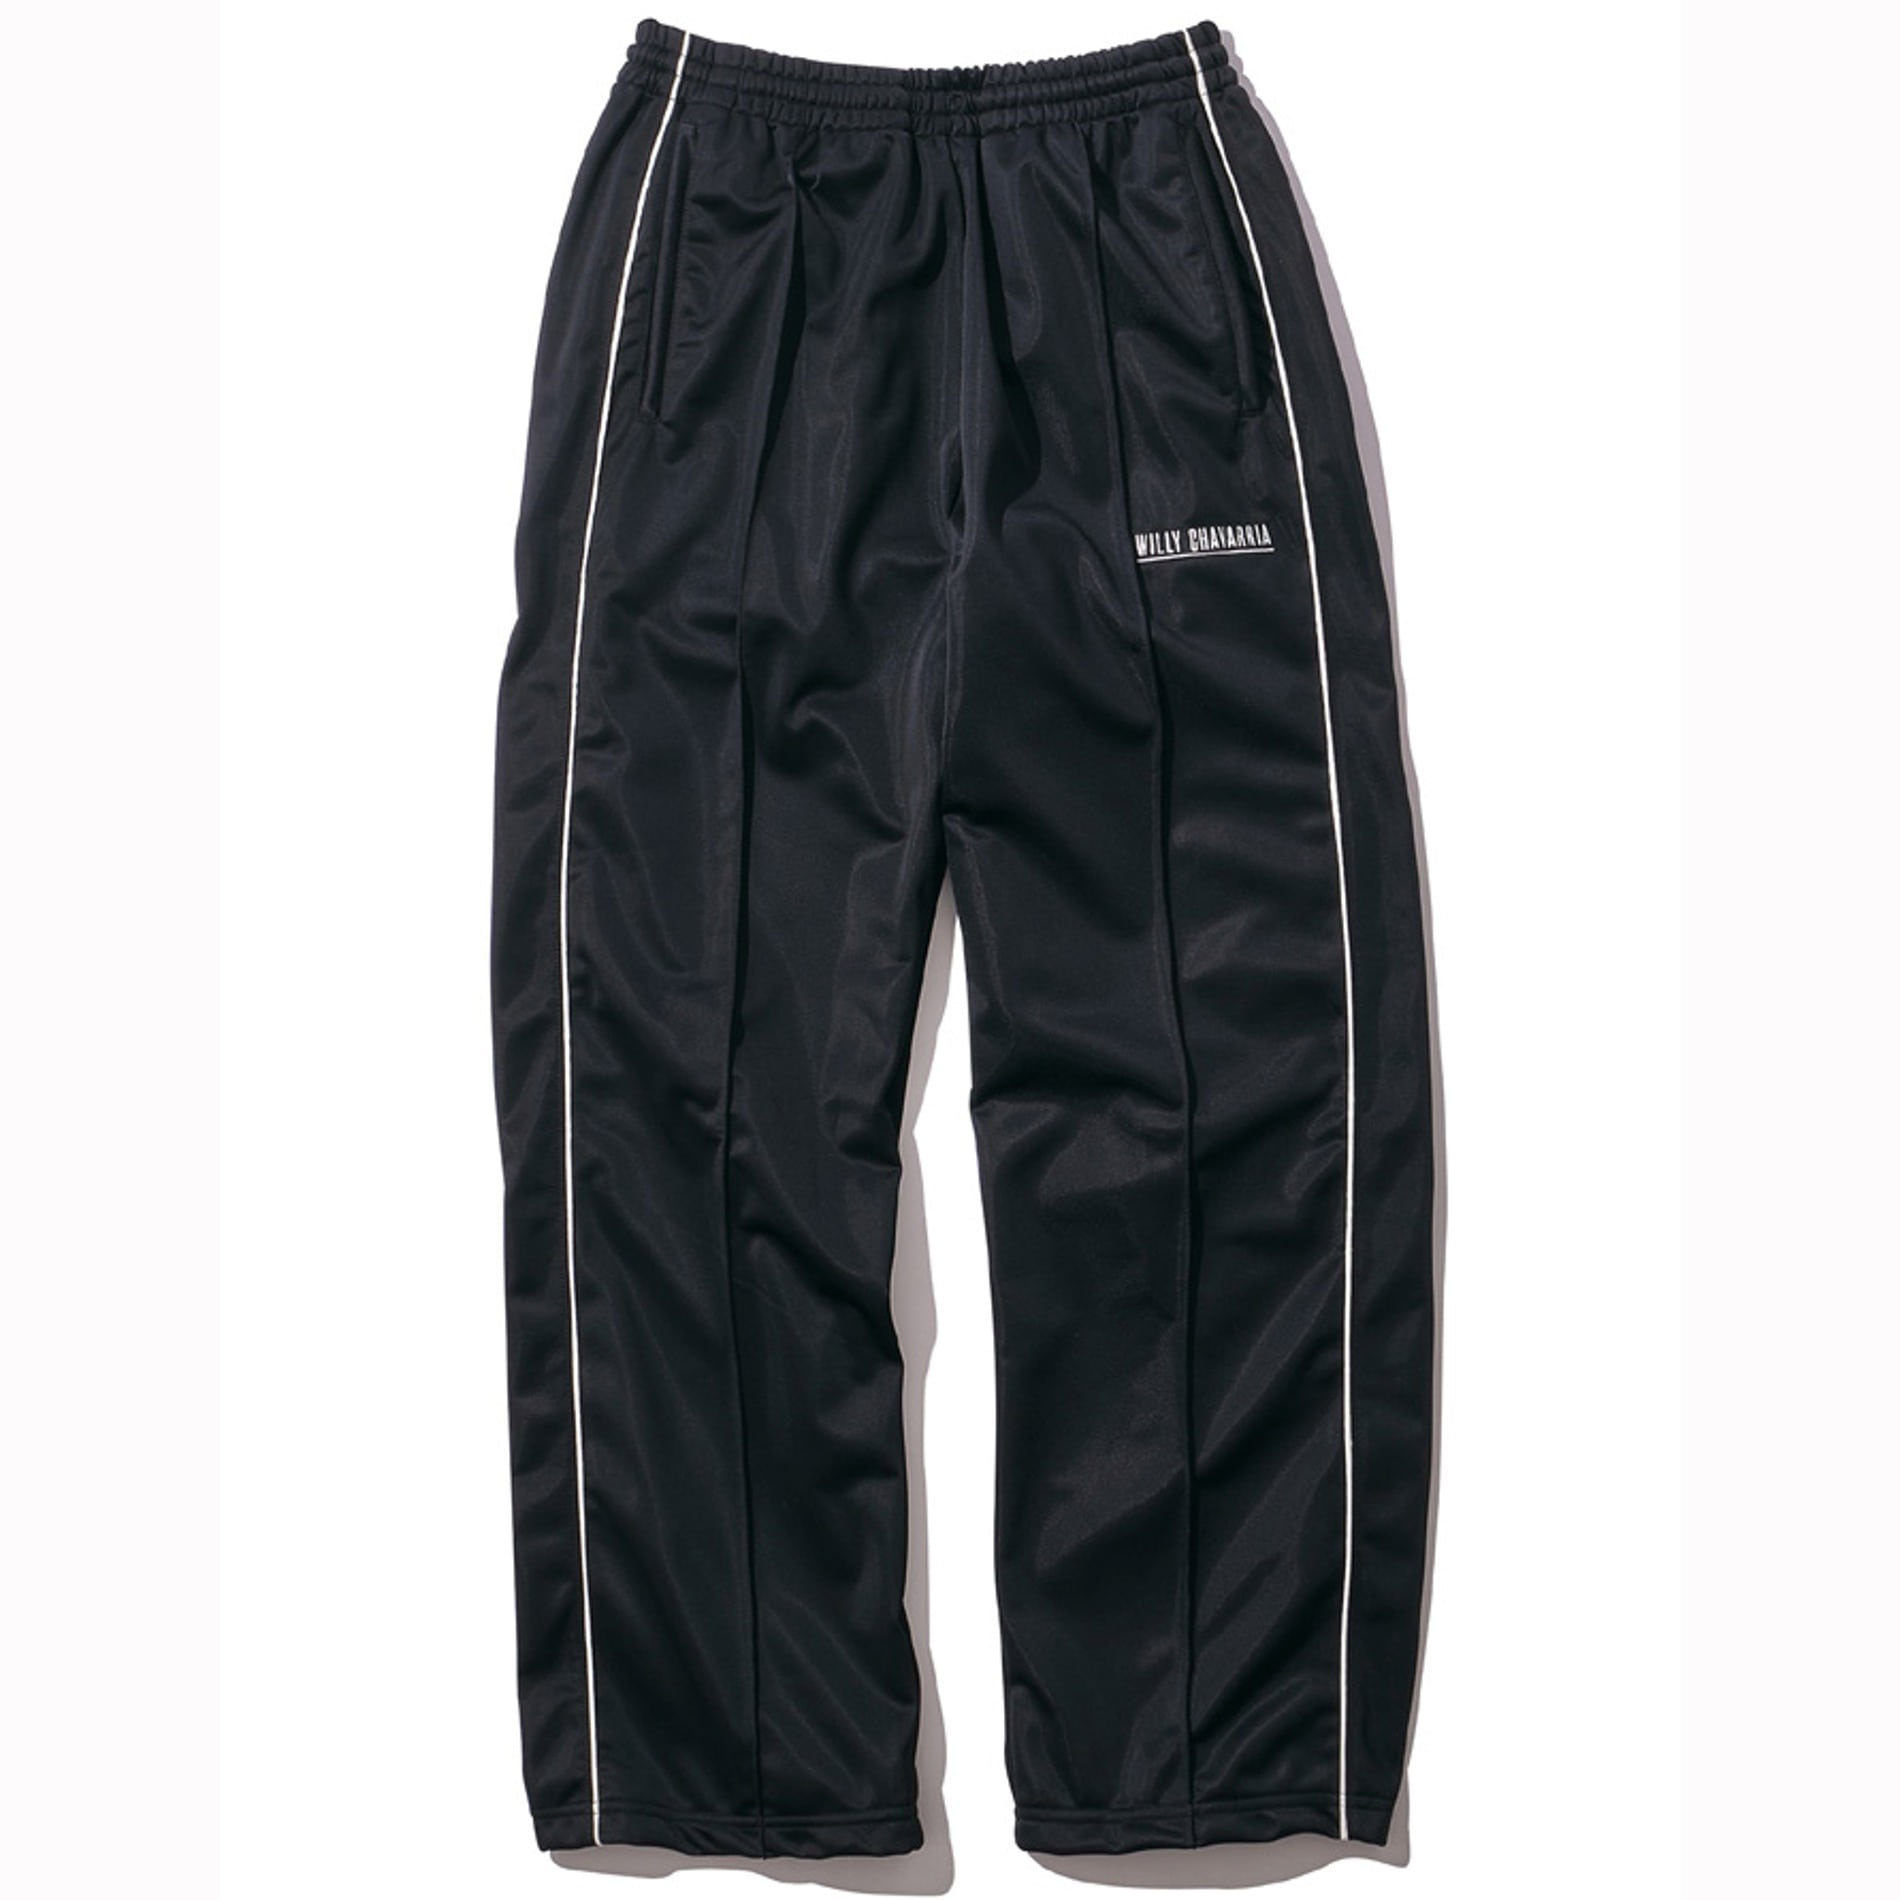 WILLY CHAVARRIA NEW TRACK PANT BLACK